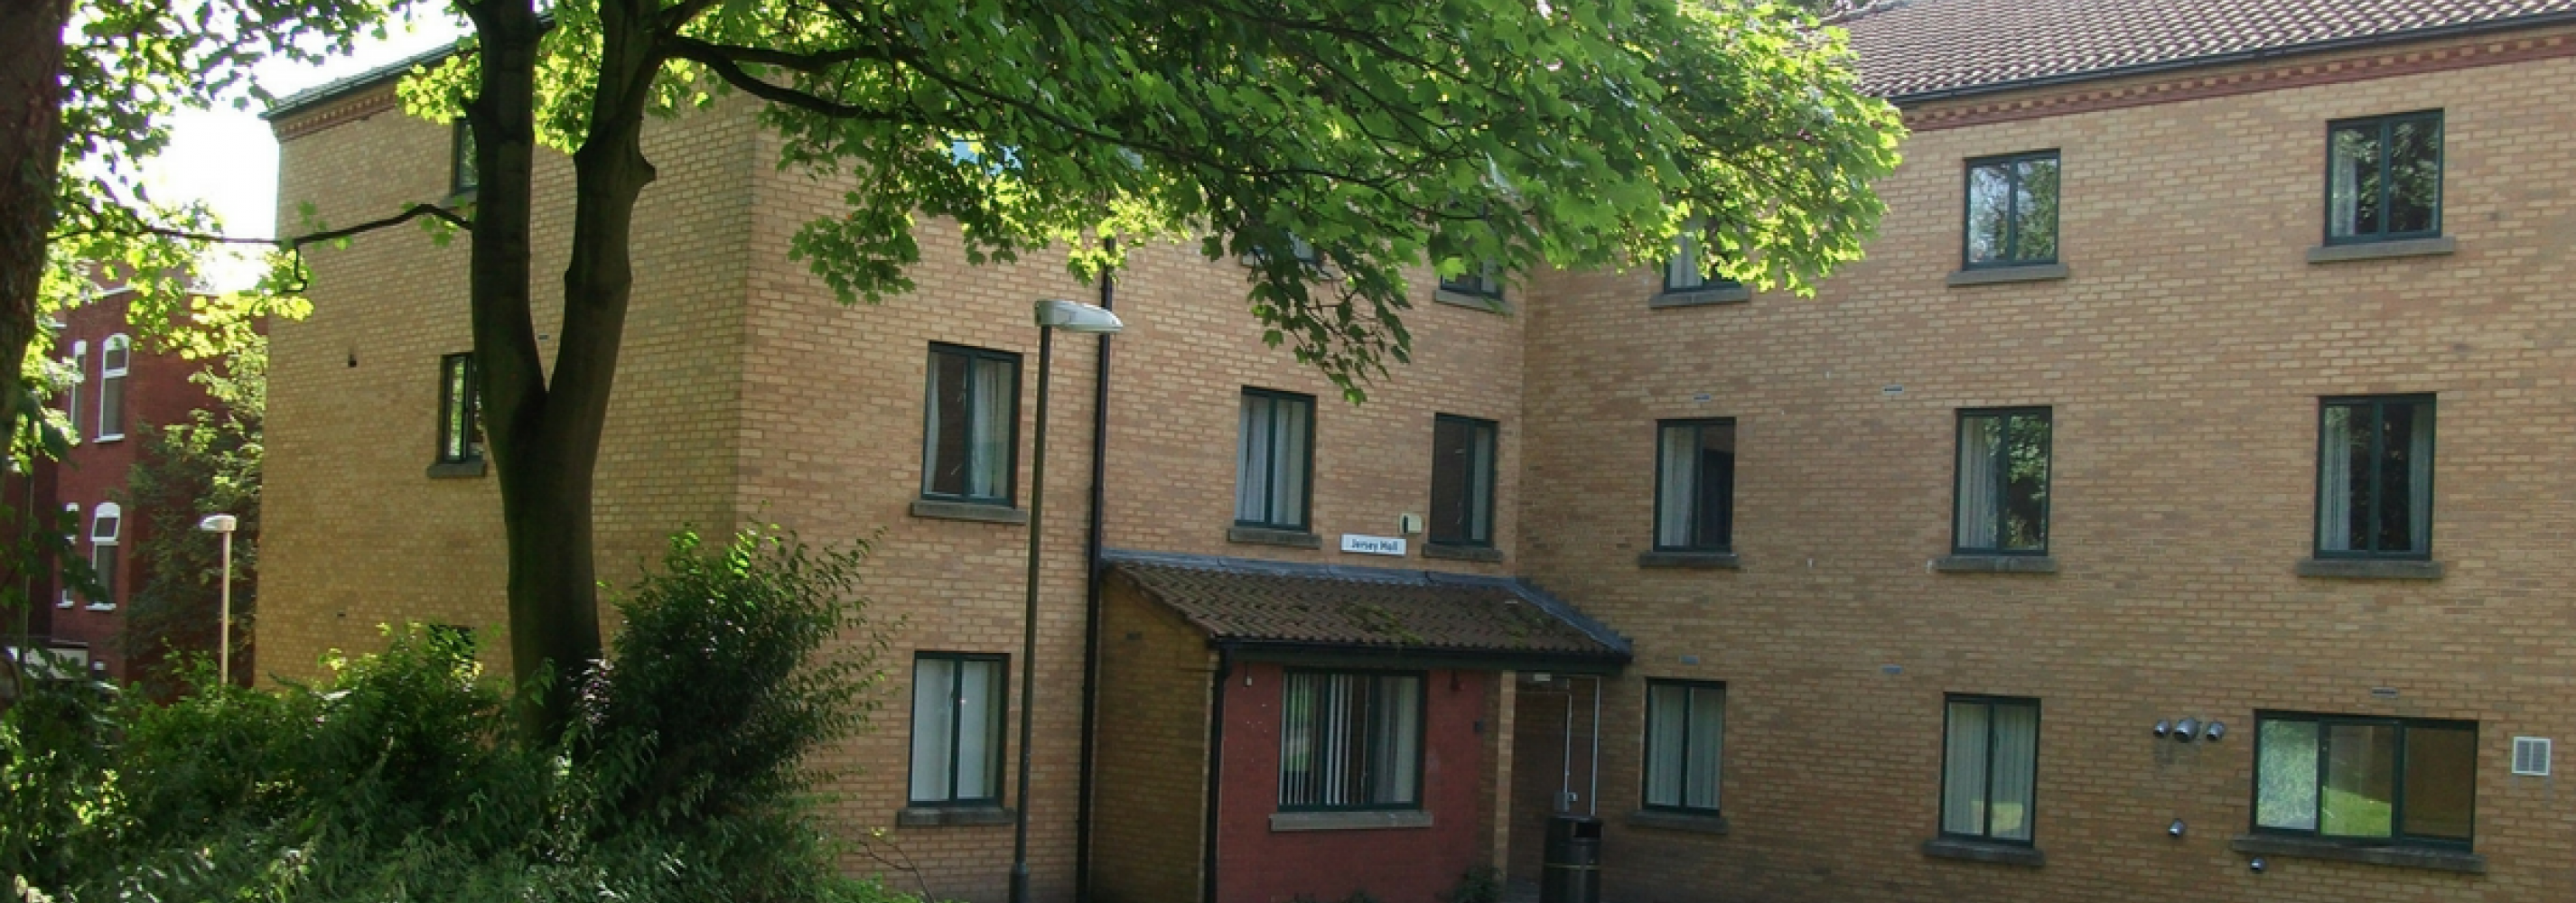 Ensuite accommodation building